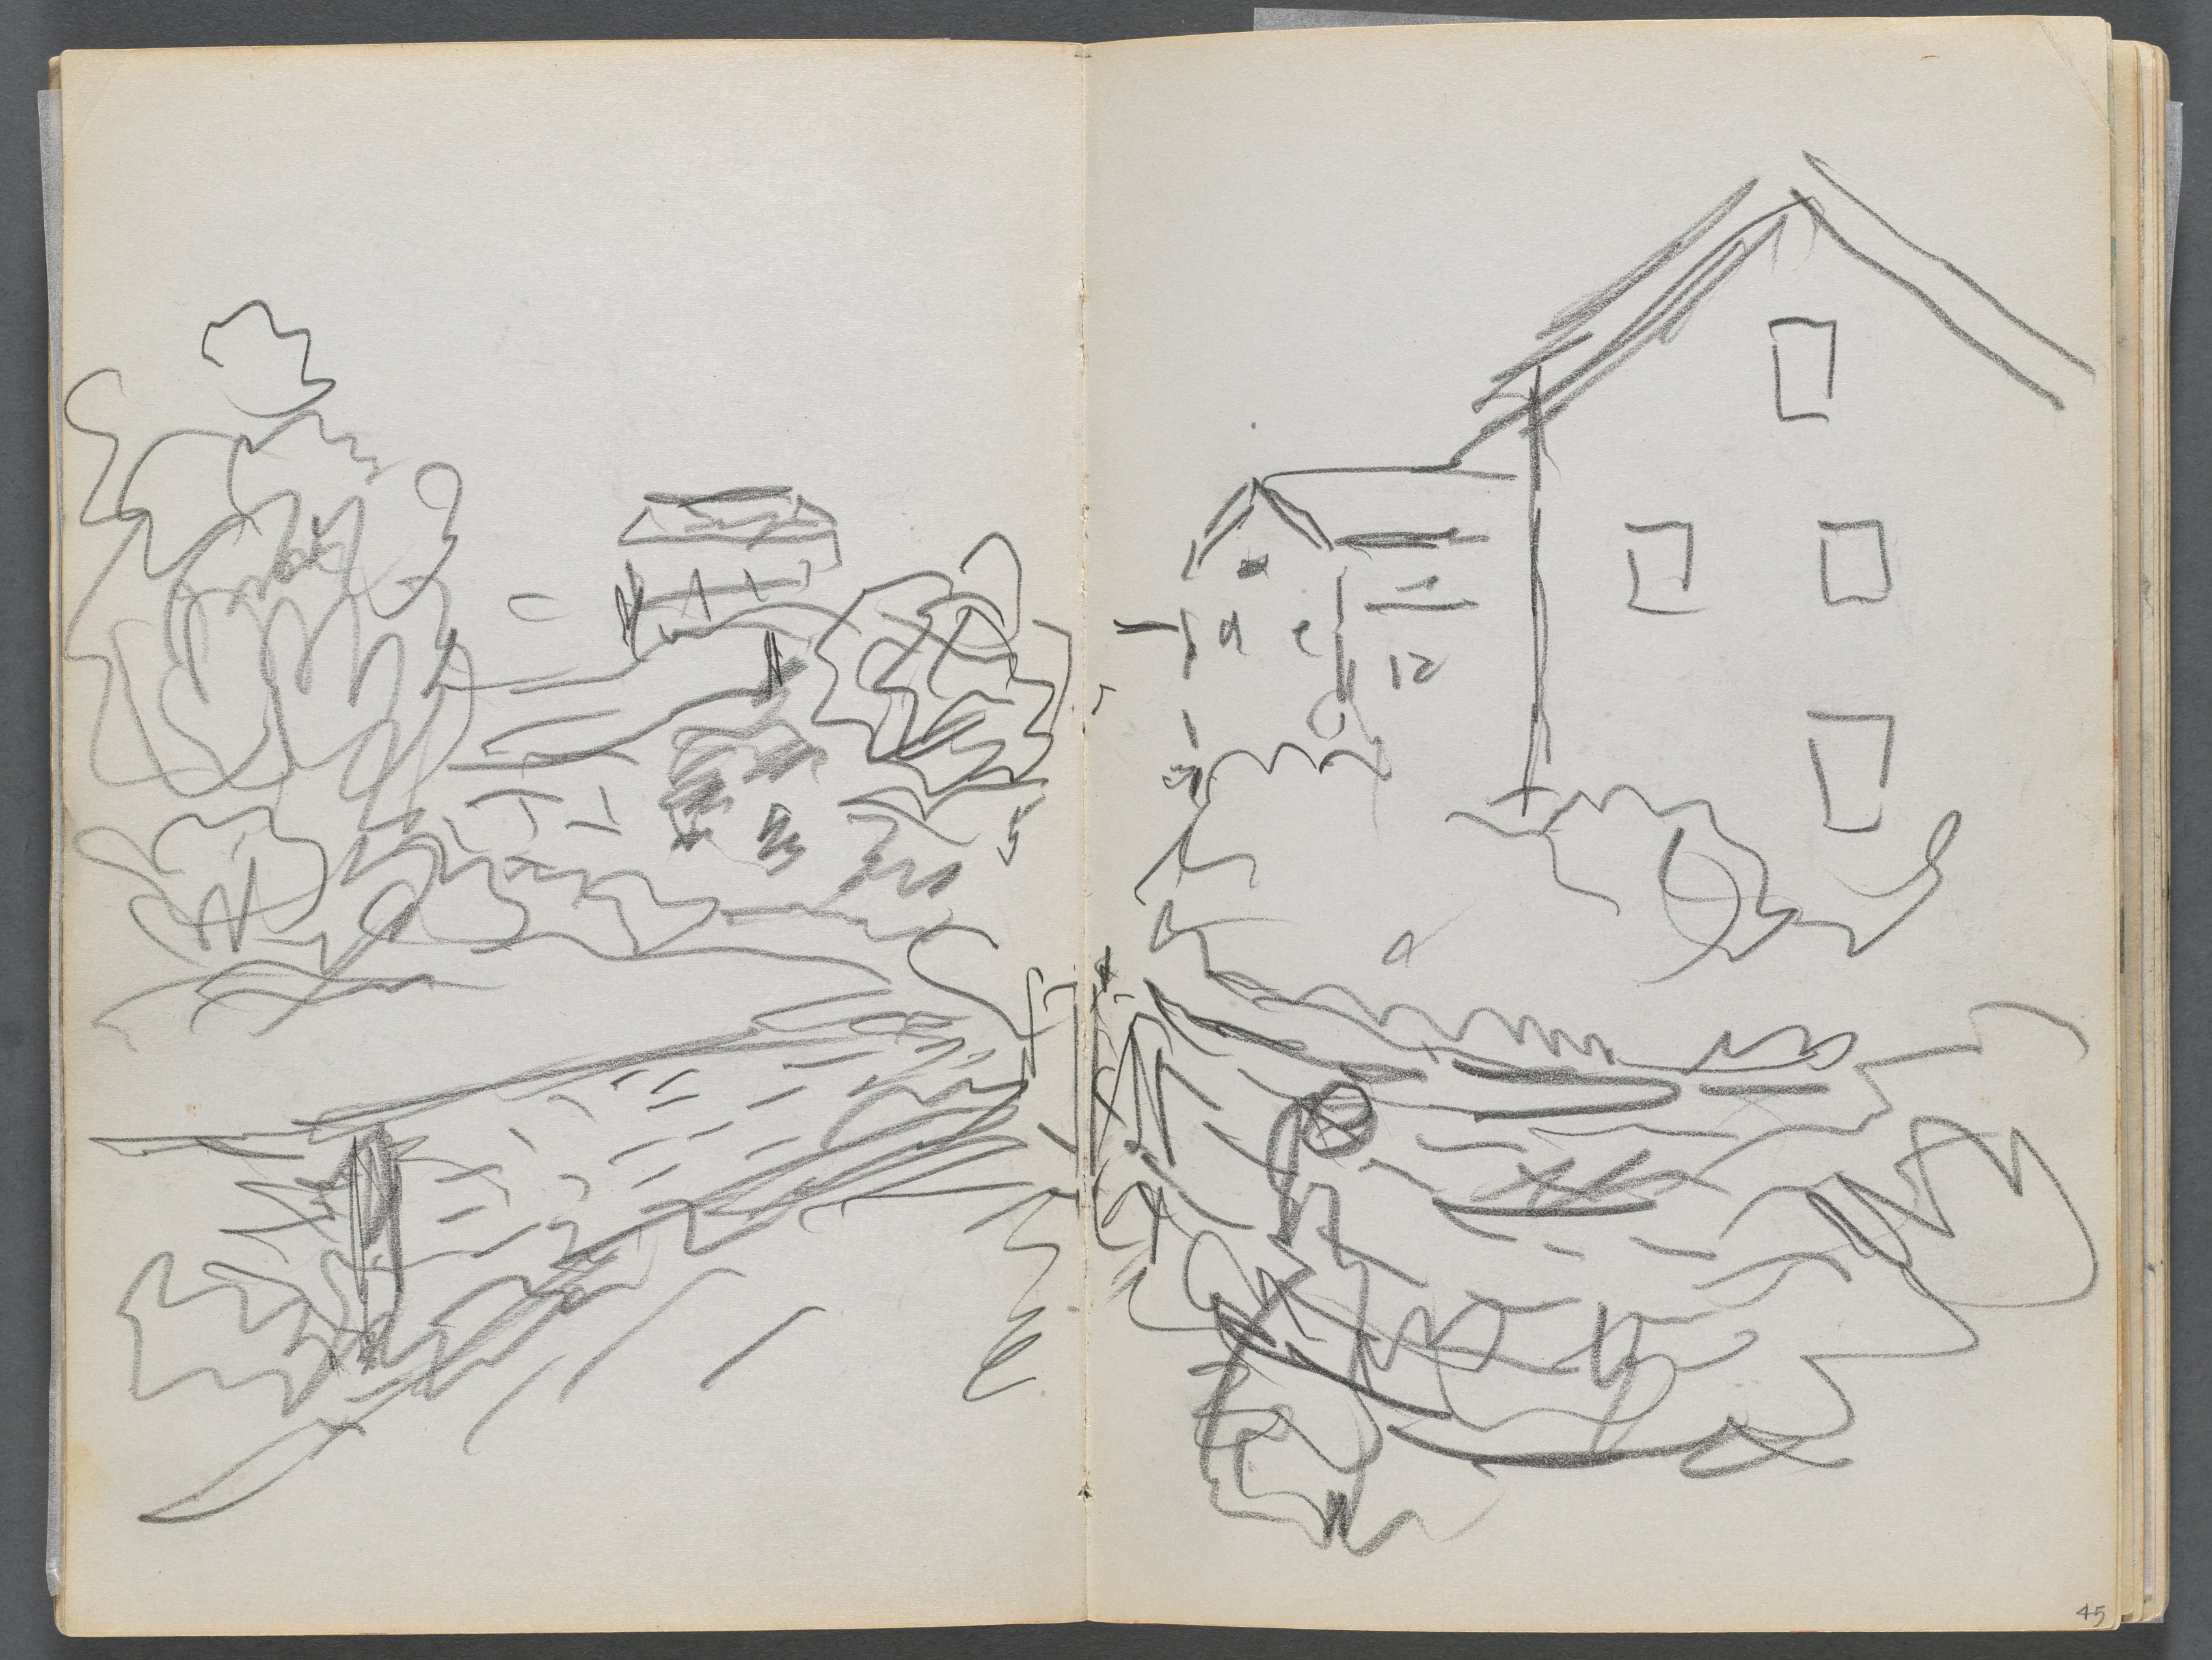 Sketchbook, The Dells, N° 127, page 044 & 45: Landscape with Houses